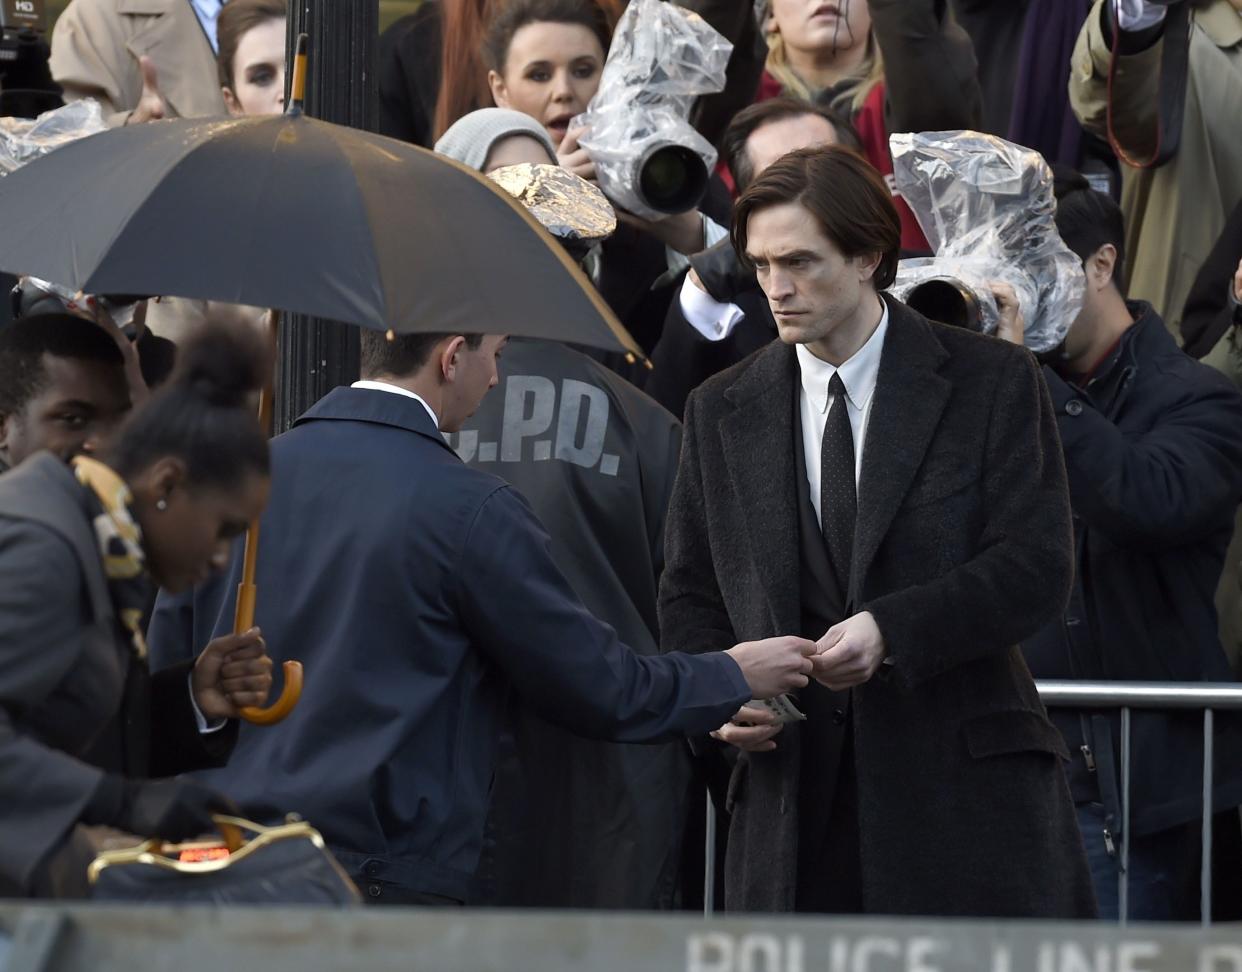 Filming is back in session after a hiatus due to COVID-19. Robert Pattinson is spotted in character as Bruce Wayne on the set of "The Batman" in Liverpool, England, on Tuesday, Oct. 13, 2020.